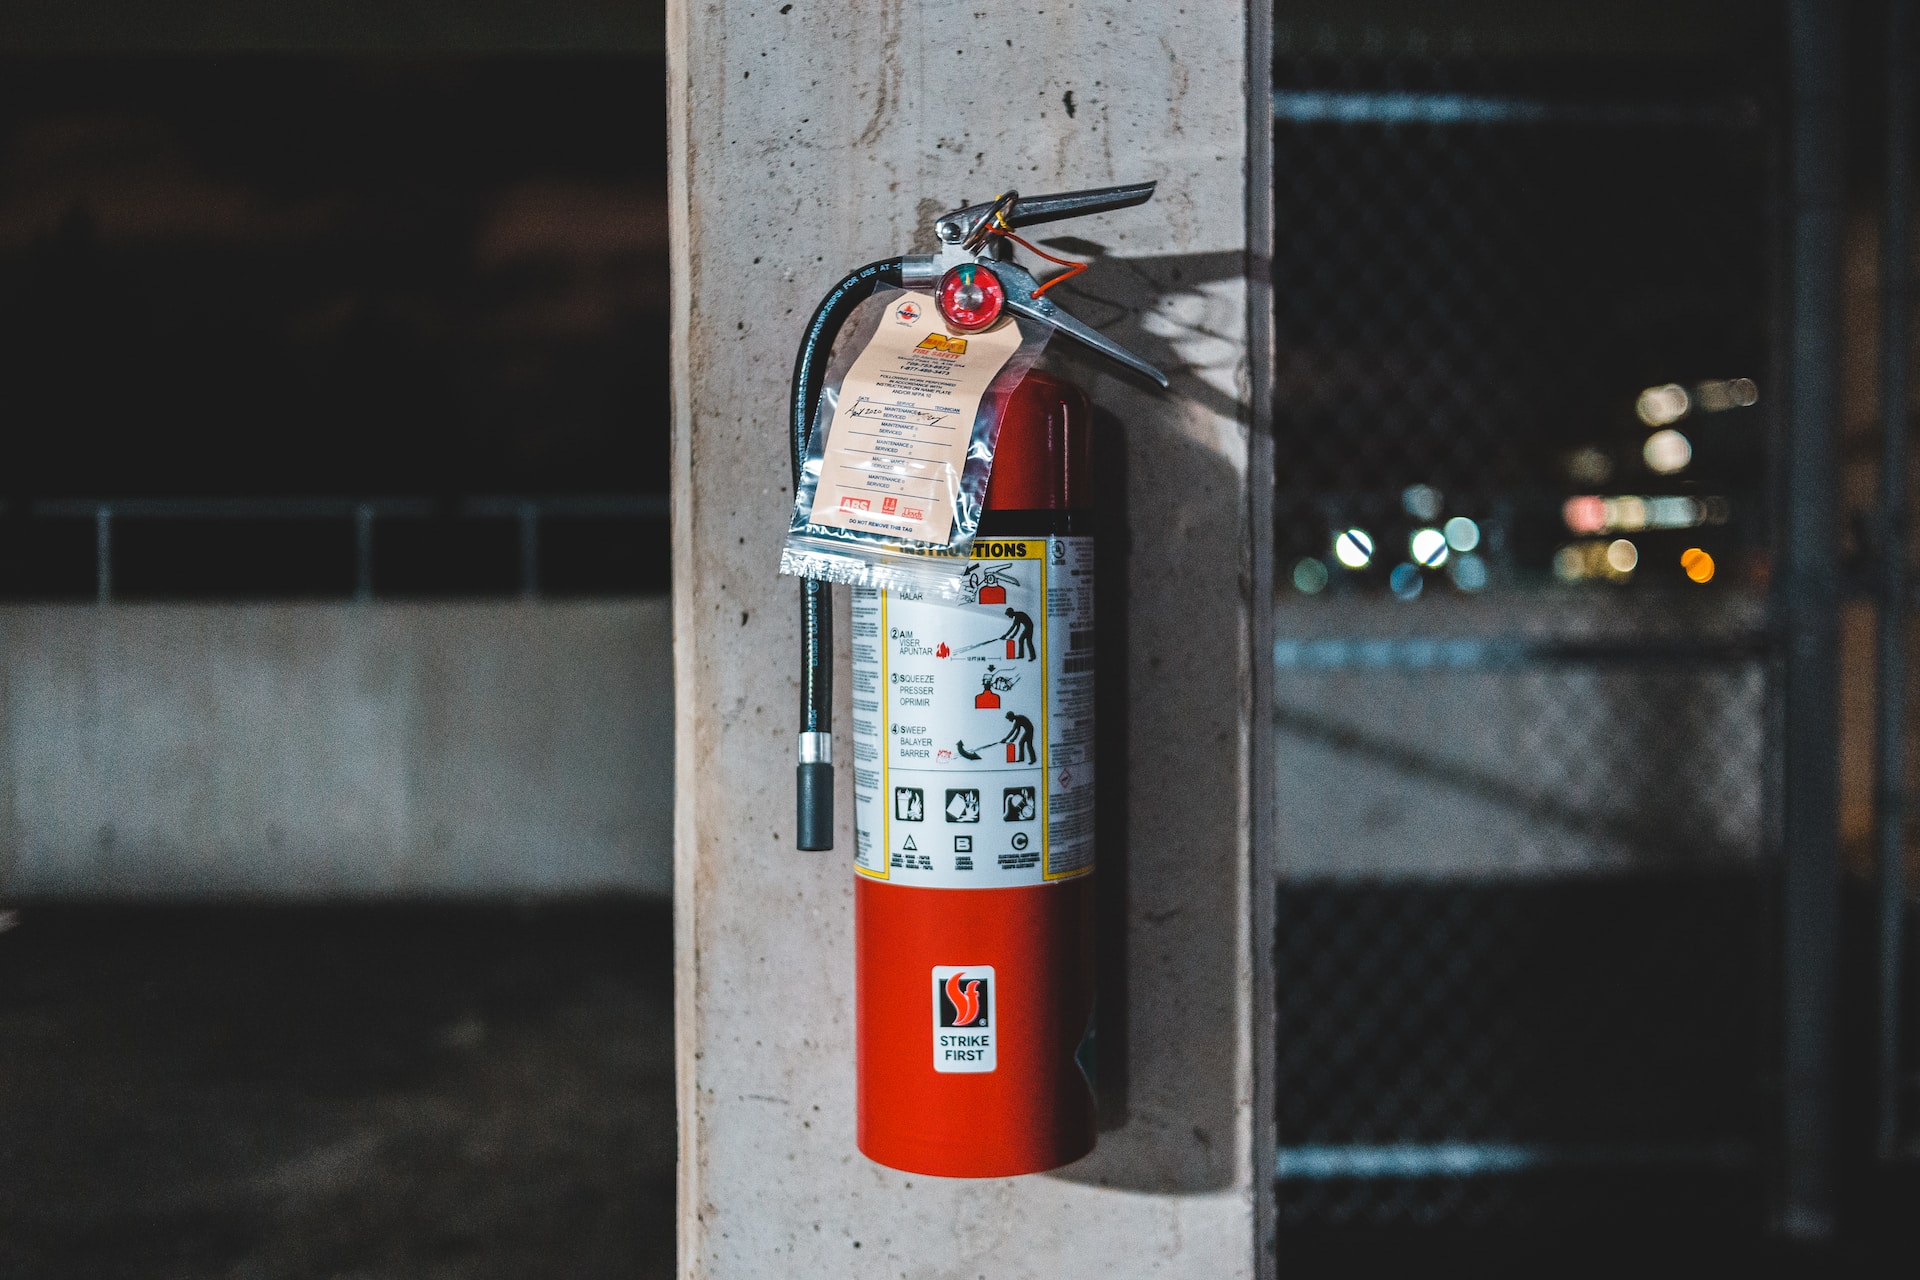 The Role of Leadership in Promoting Fire Safety Culture at Work